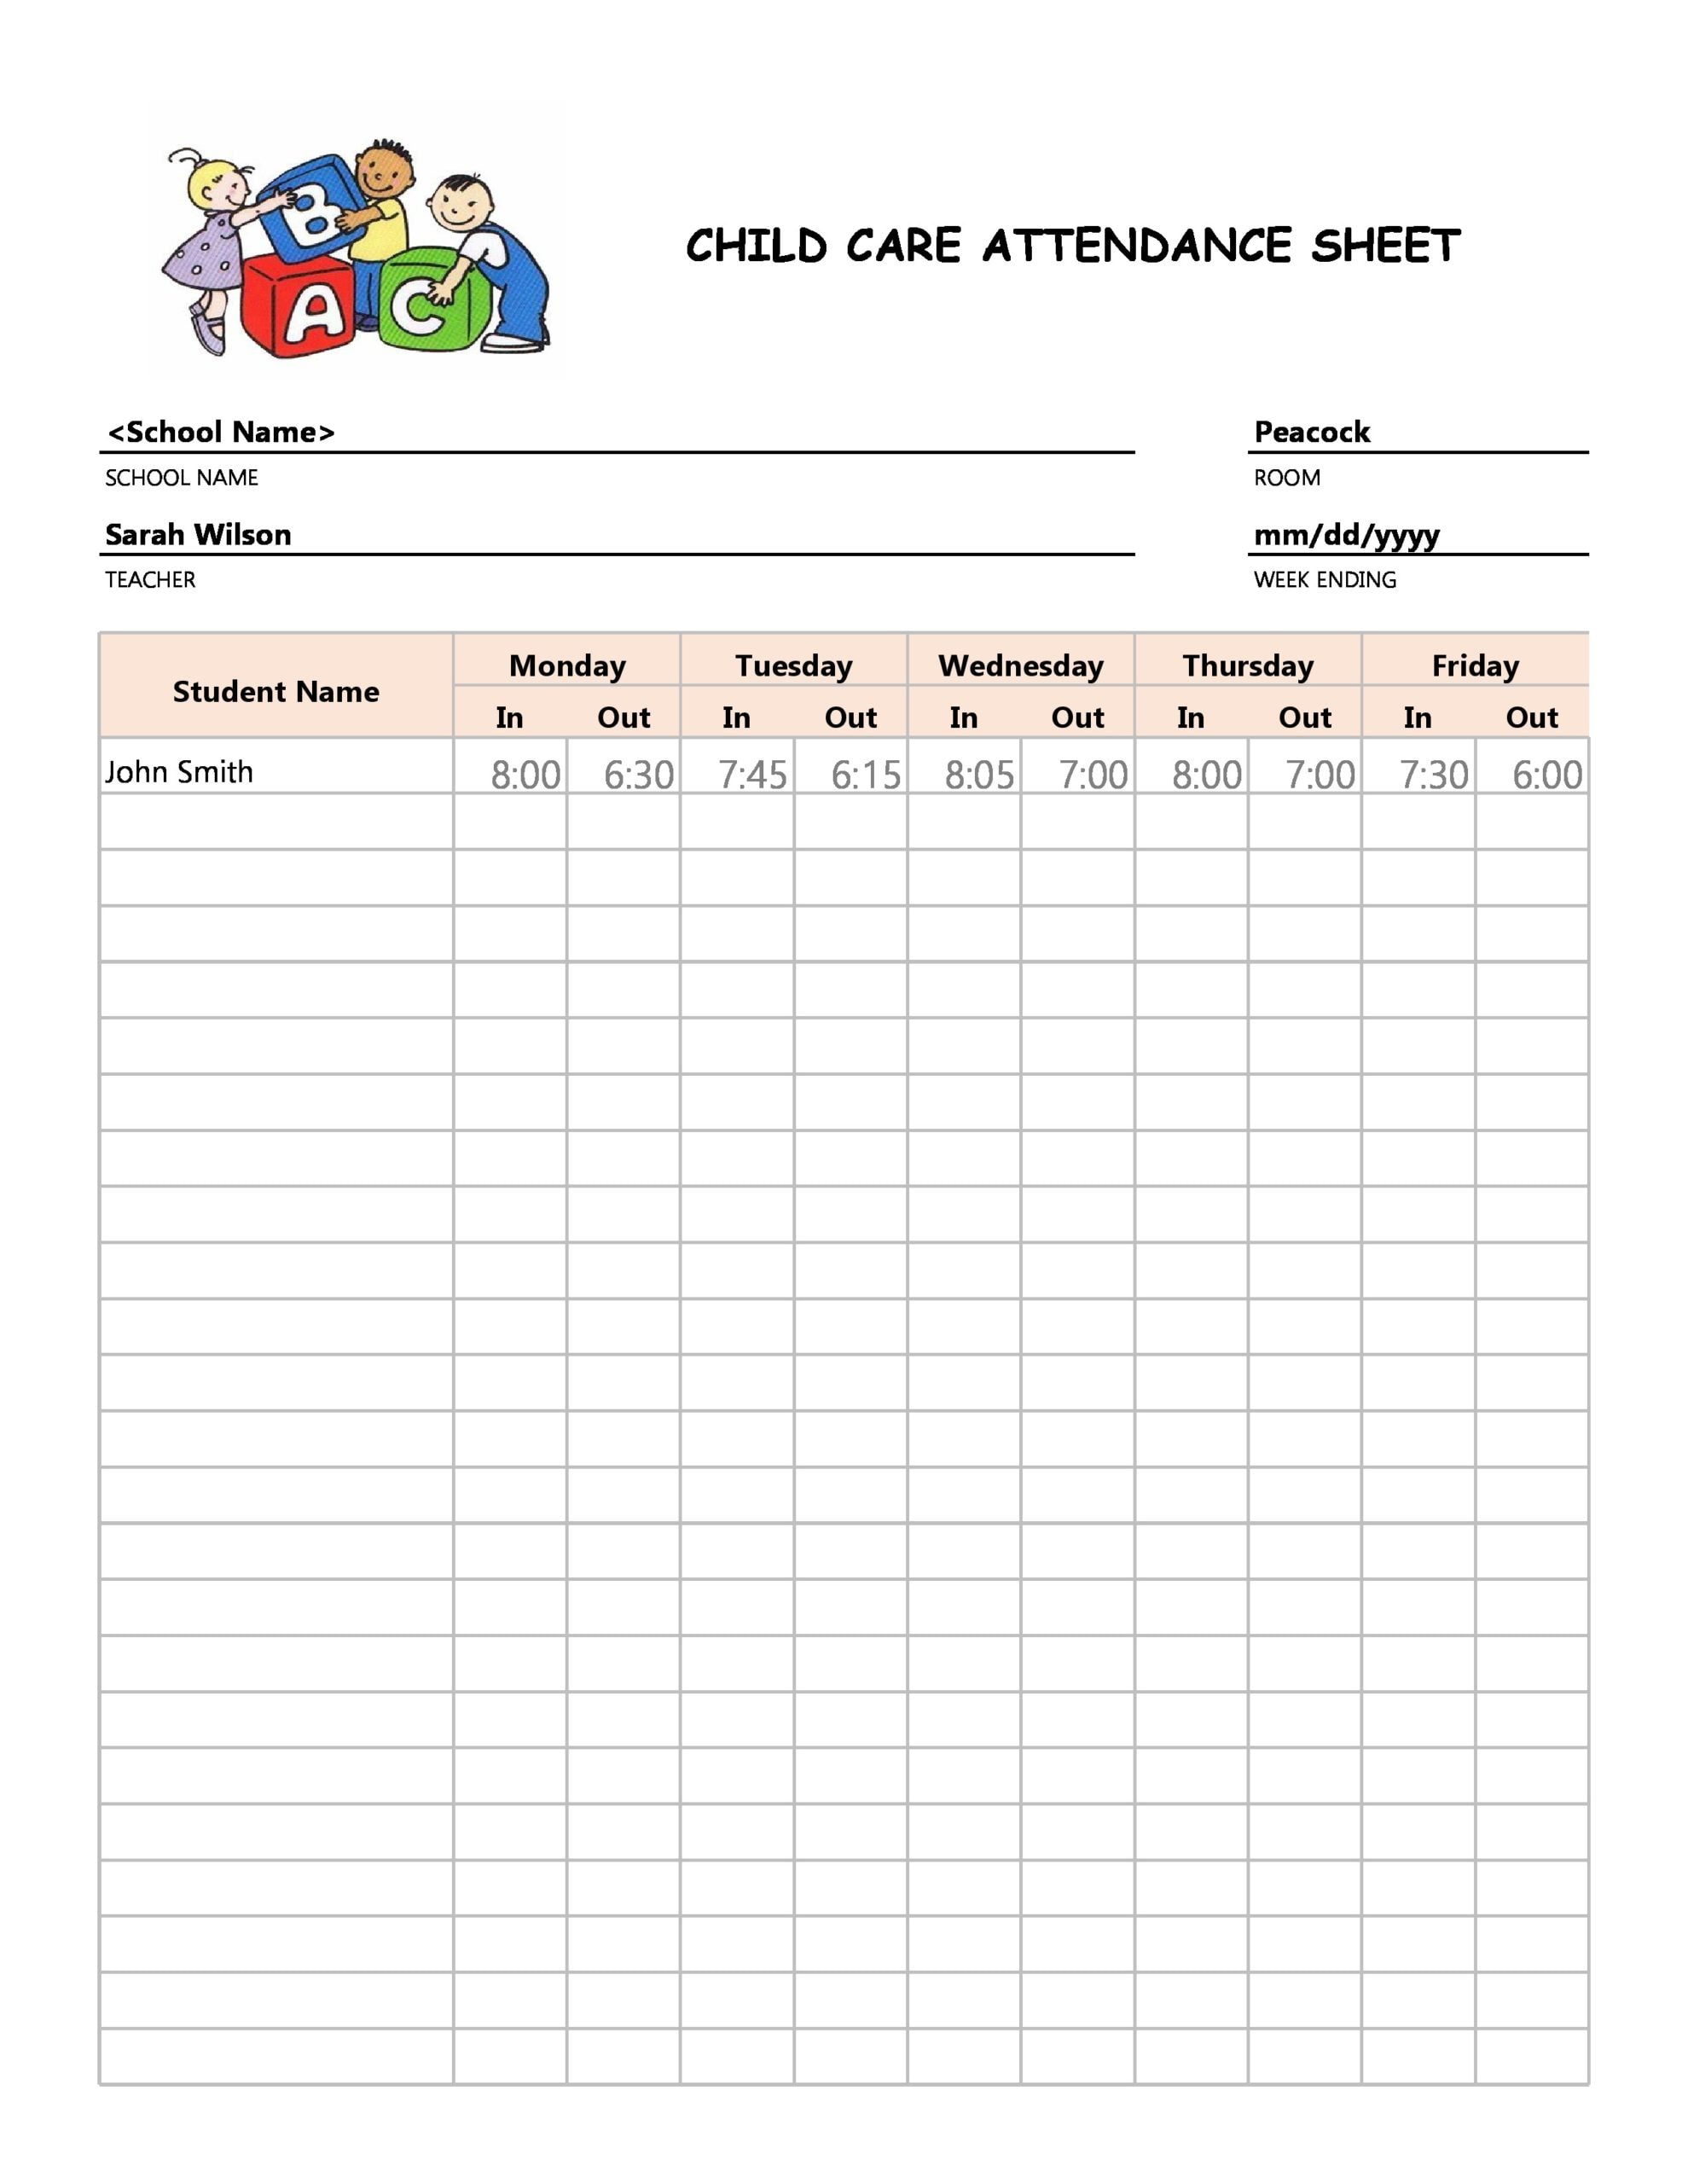 printable-attendance-form-printable-forms-free-online